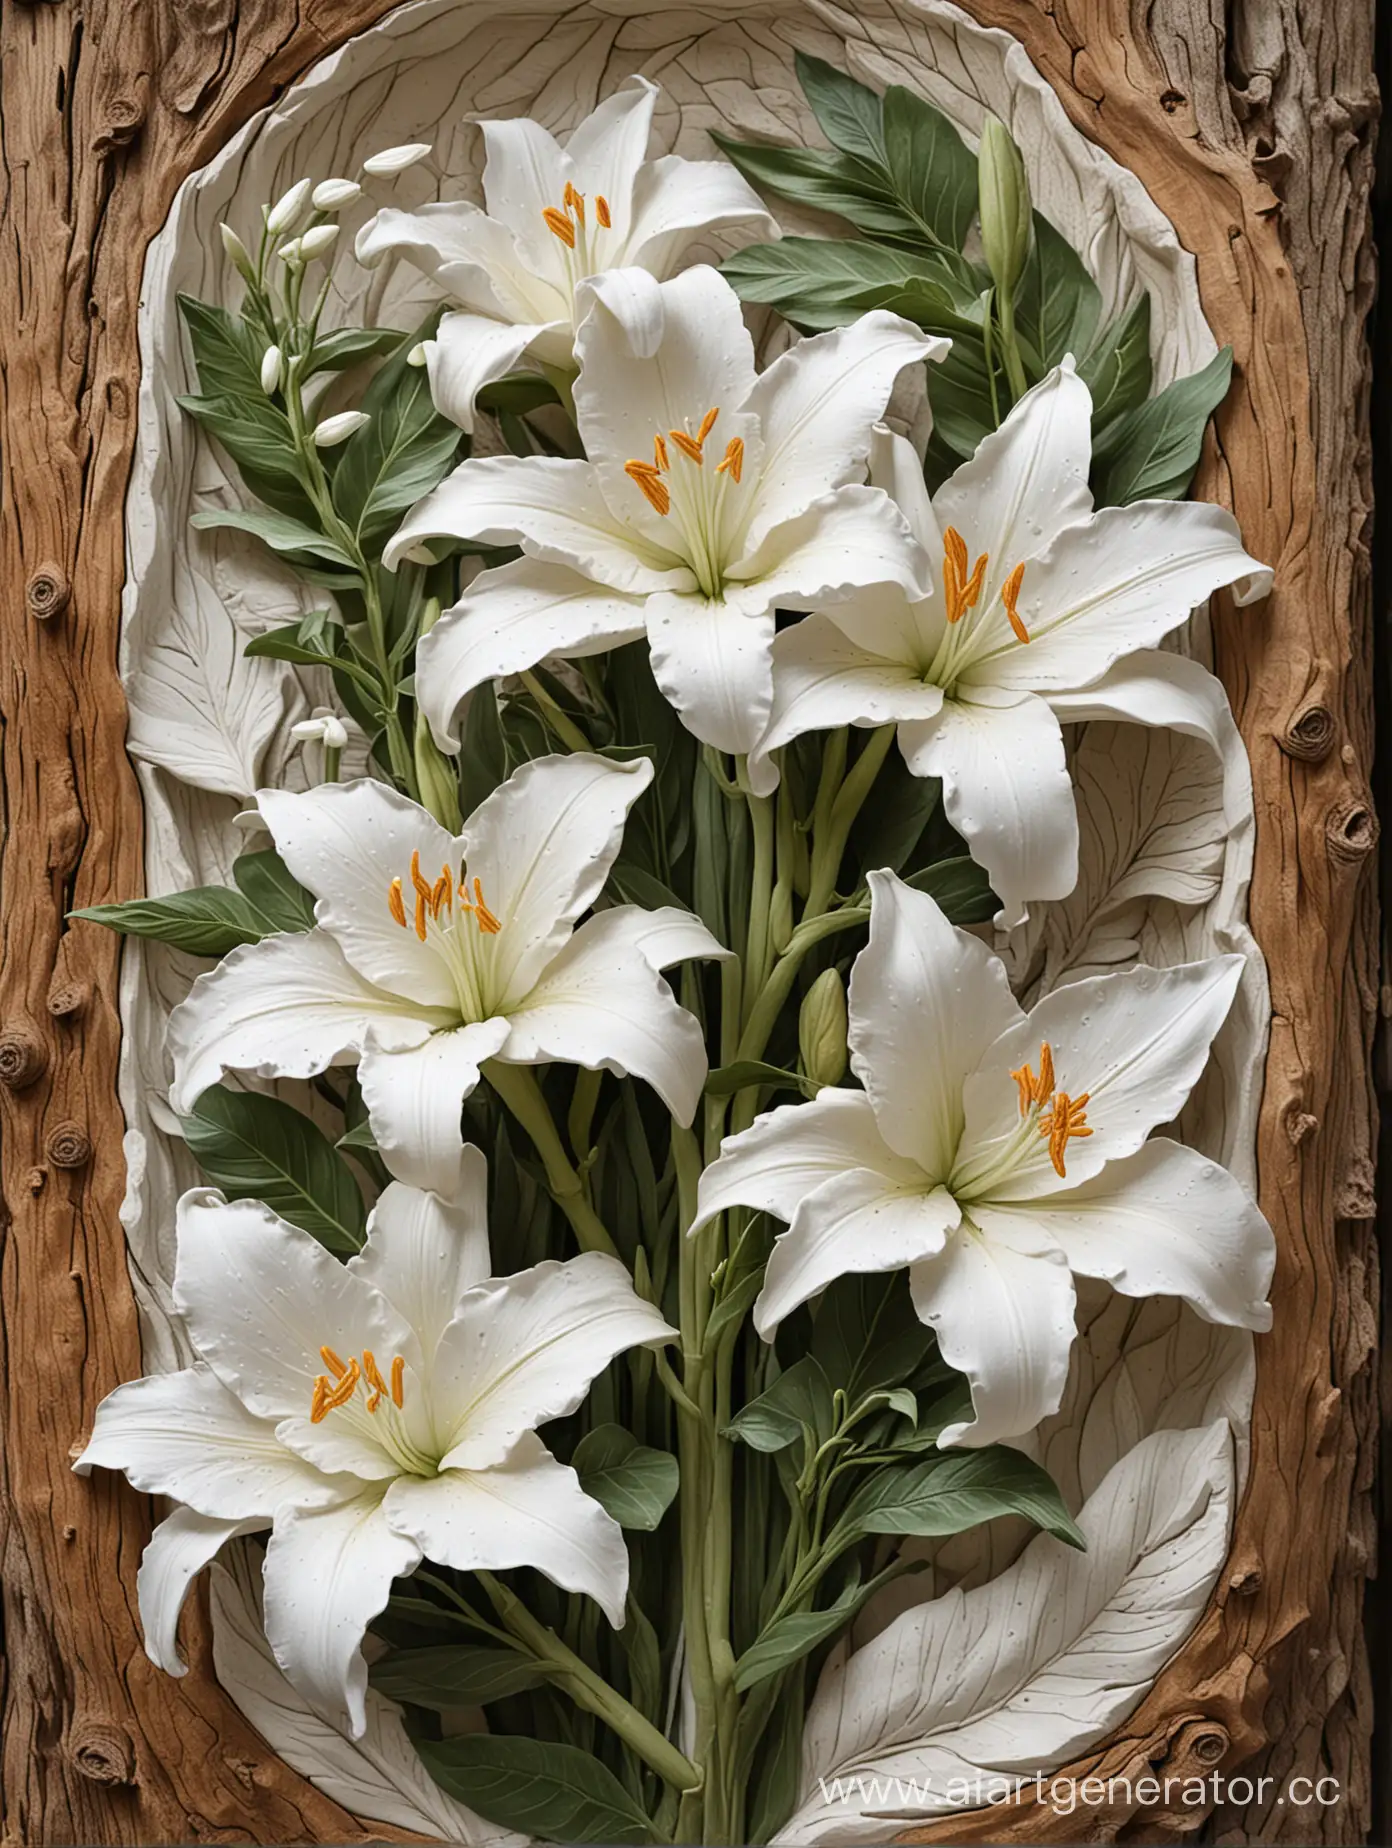 White-BasRelief-Sculpture-of-Stone-Lilies-on-Old-Tree-Branch